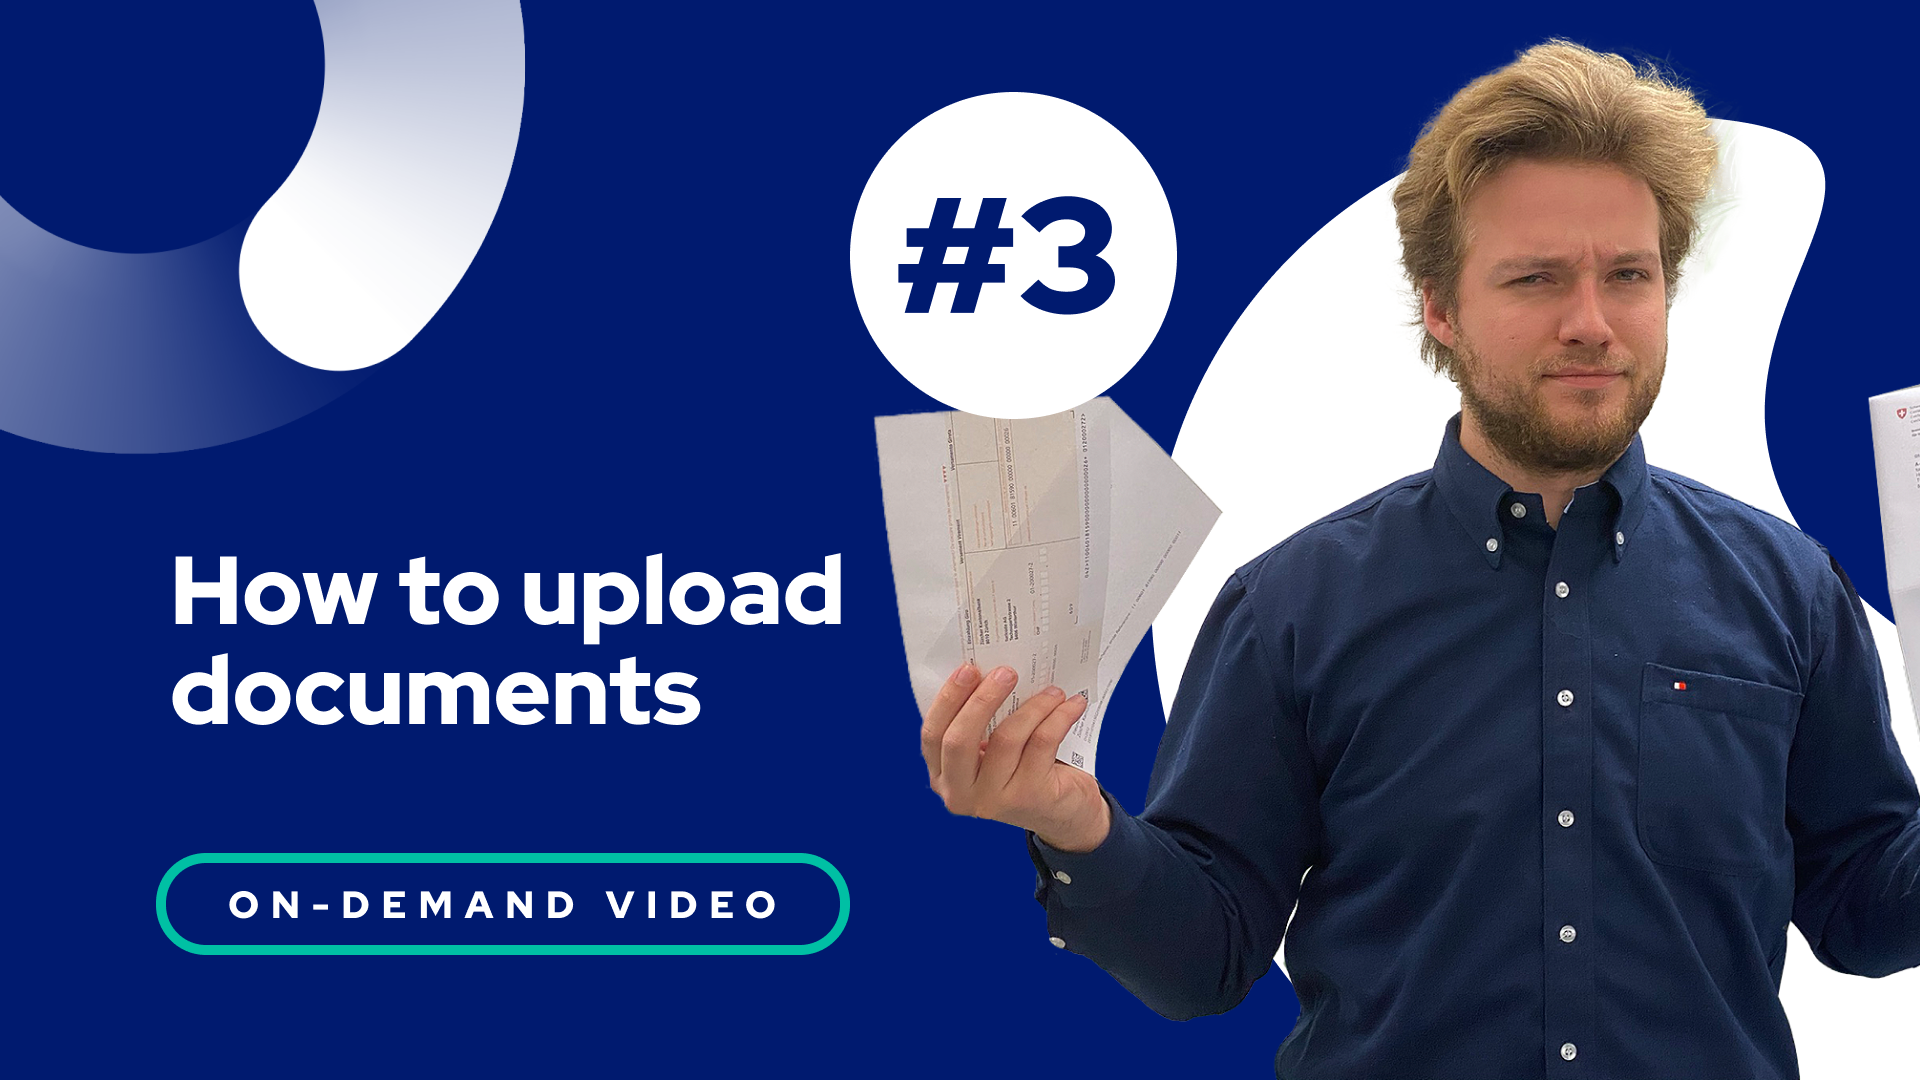 Max holds up document examples before showing you how to process them with Intelligent Document Processing